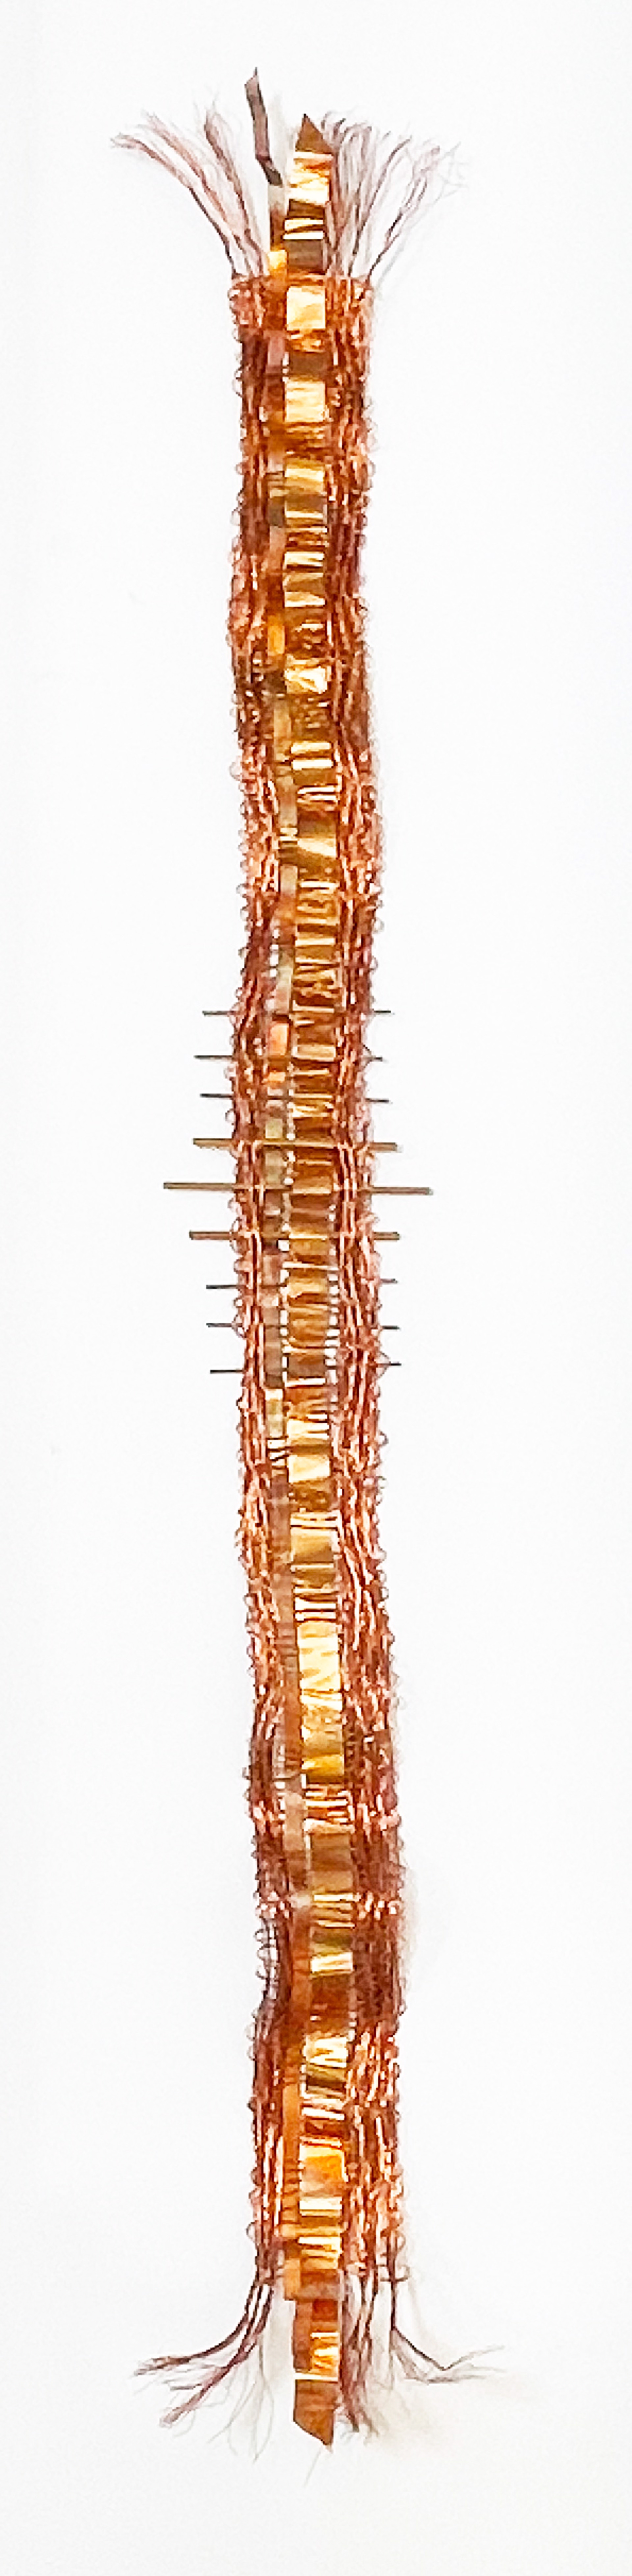 Shangri-La Copper Weaving with Rods by Susan McGehee